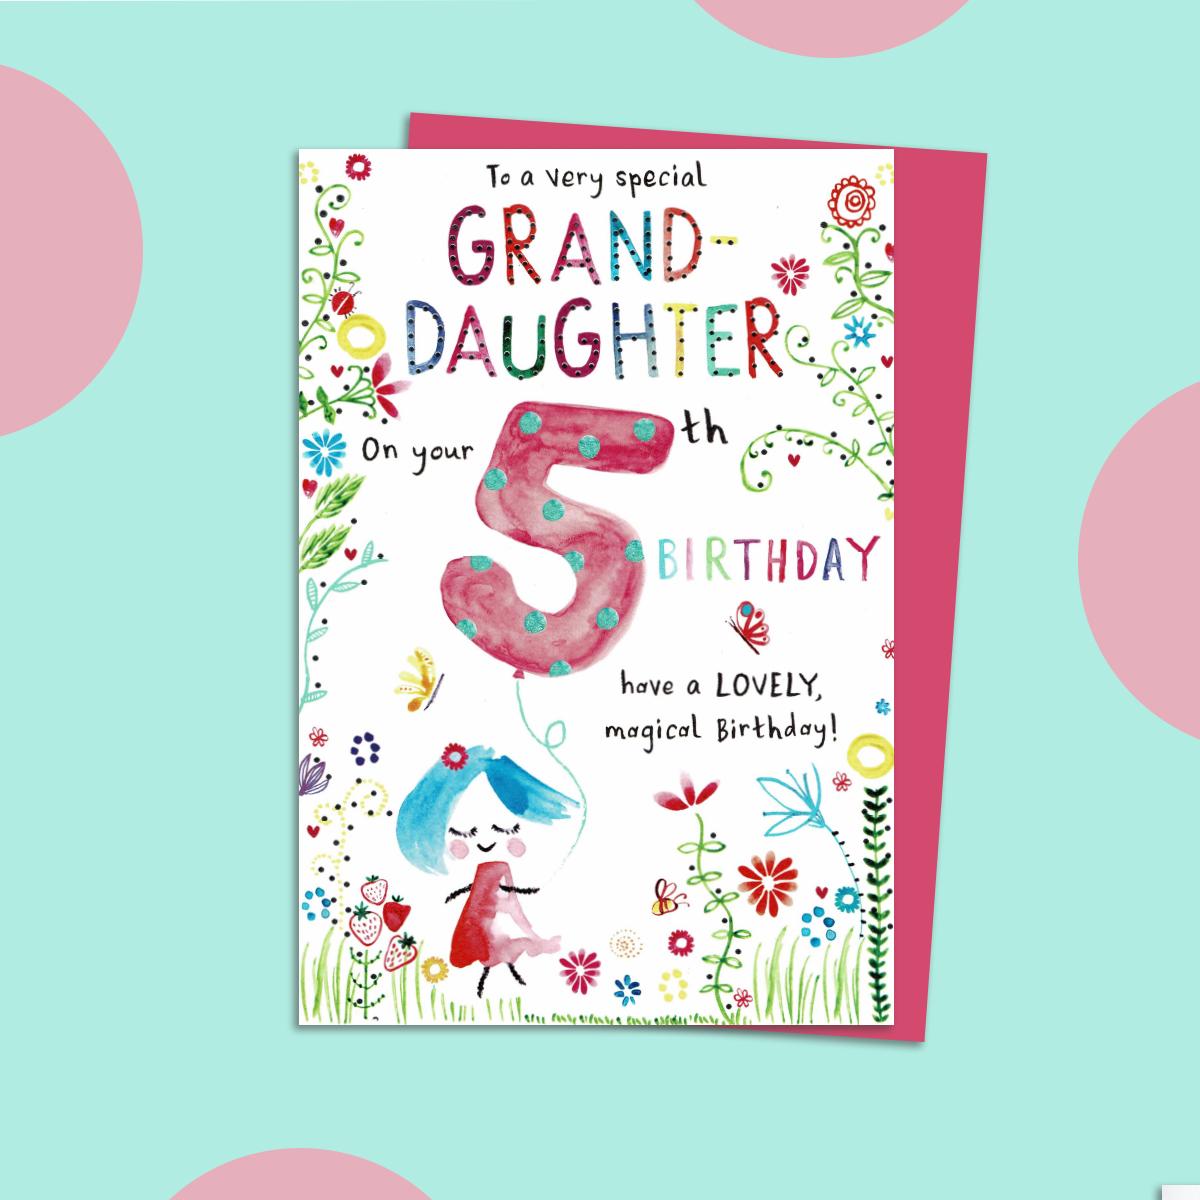 Special Granddaughter Age 5 Birthday Card Sitting On A Display Shelf